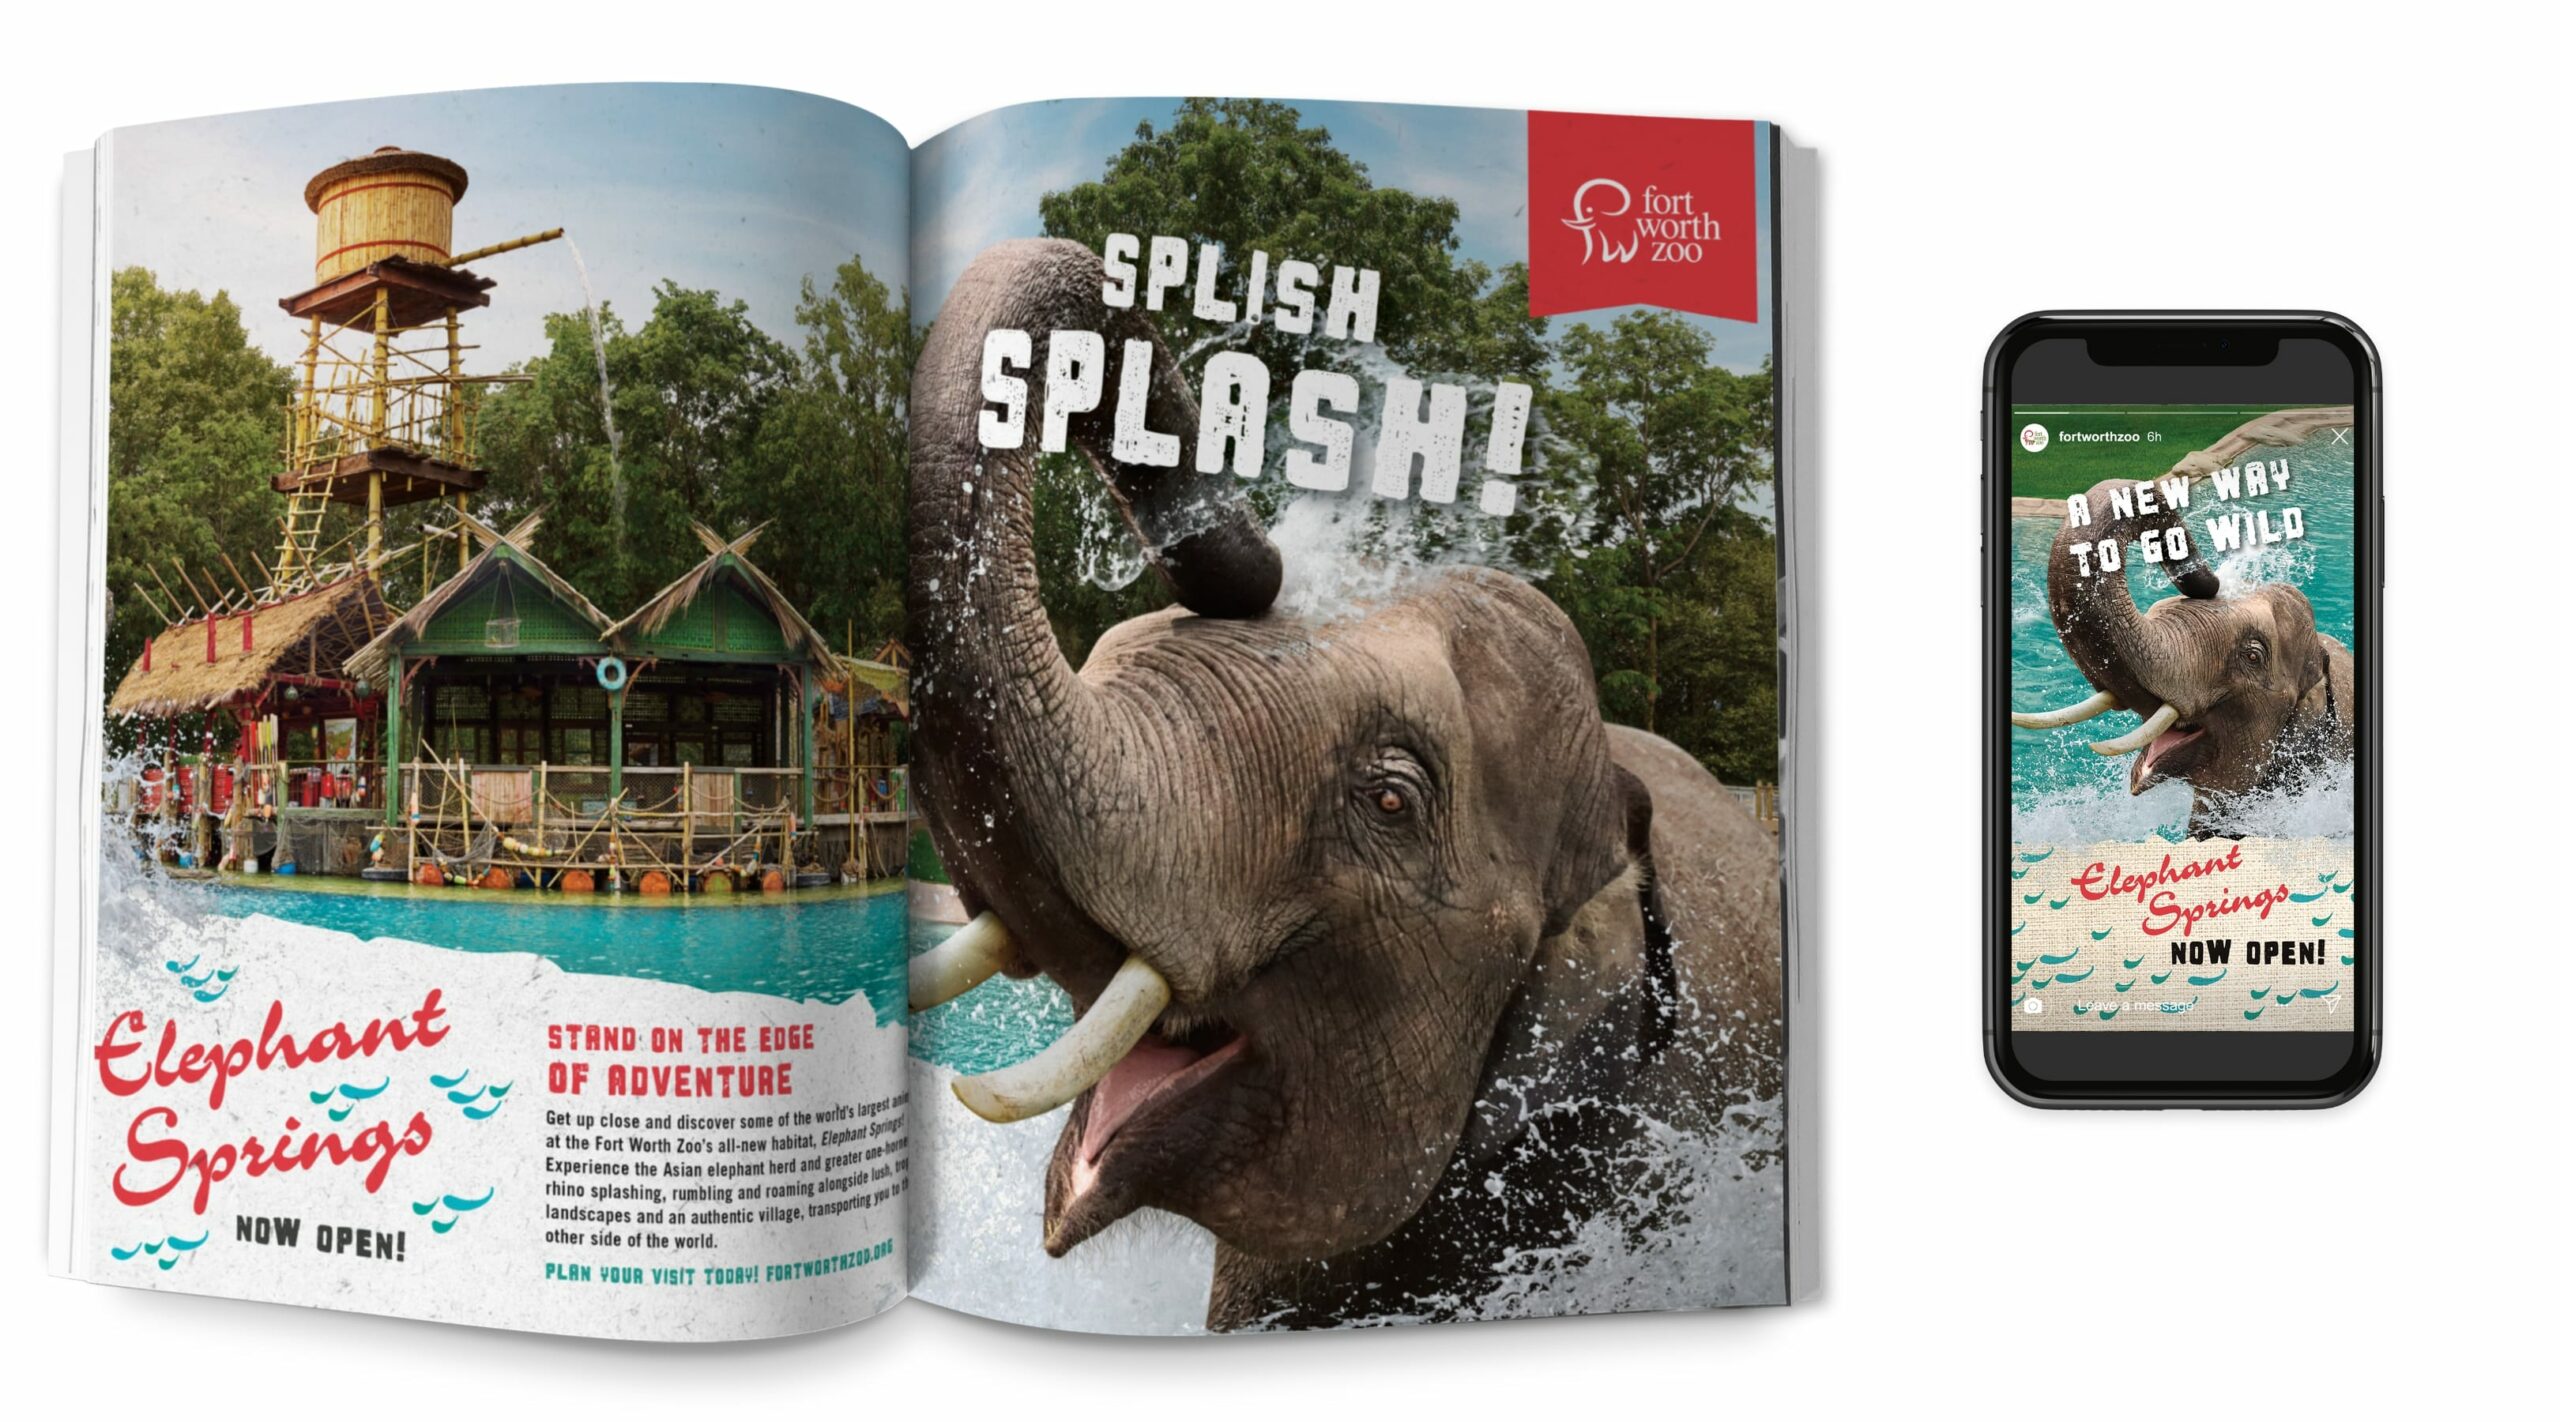 Elephant Springs Magazine and Mobile Ads